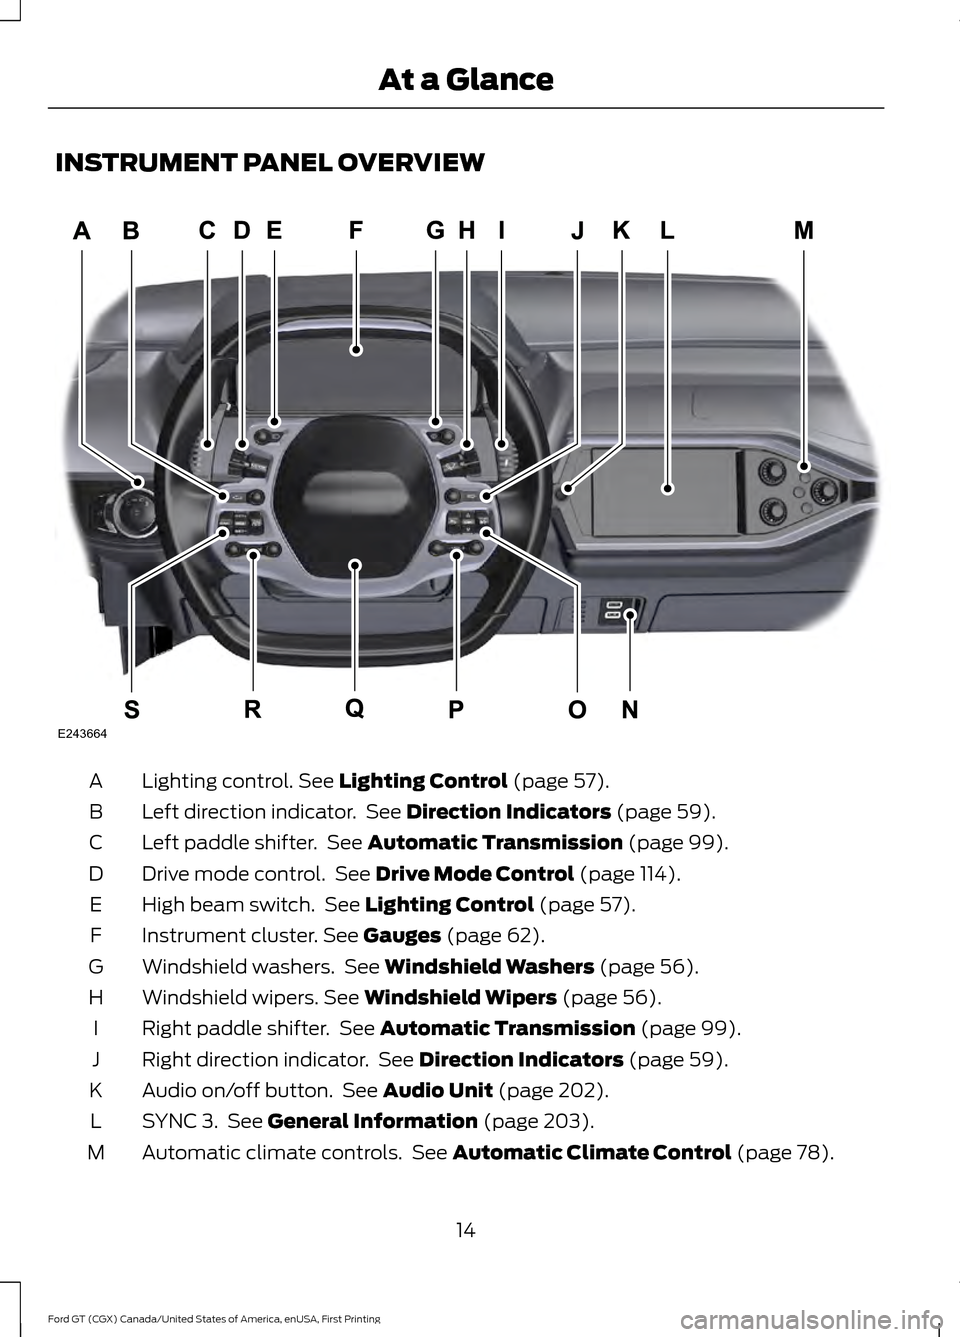 FORD GT 2017 2.G User Guide INSTRUMENT PANEL OVERVIEW
Lighting control. See Lighting Control (page 57).
A
Left direction indicator.  See 
Direction Indicators (page 59).
B
Left paddle shifter.  See 
Automatic Transmission (page 